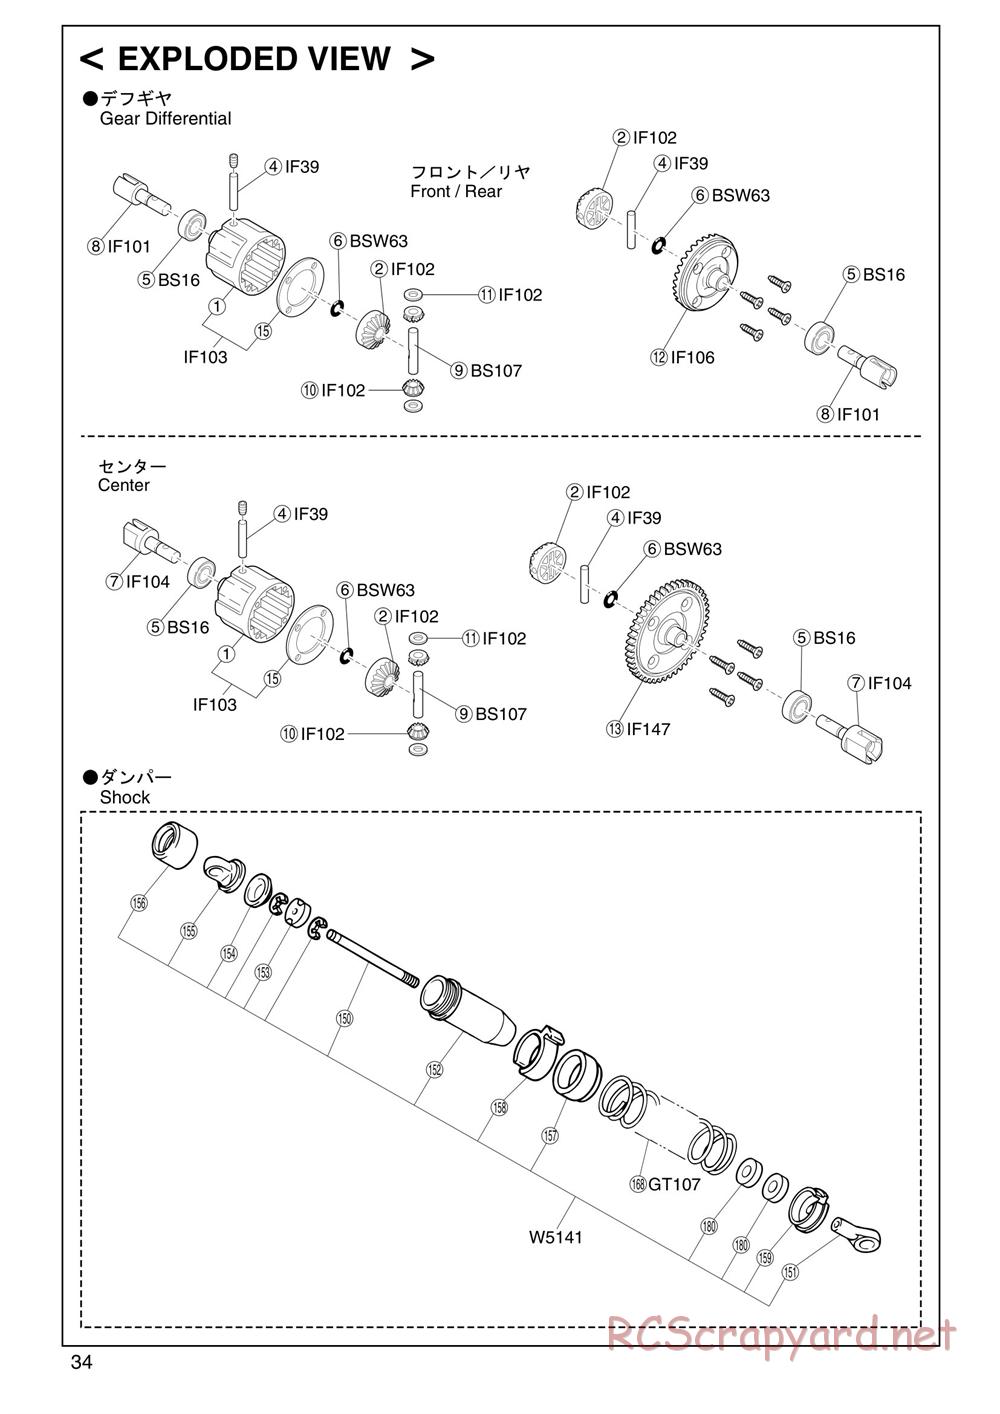 Kyosho - Super Eight GP20 Landmax 2 - Exploded Views - Page 2